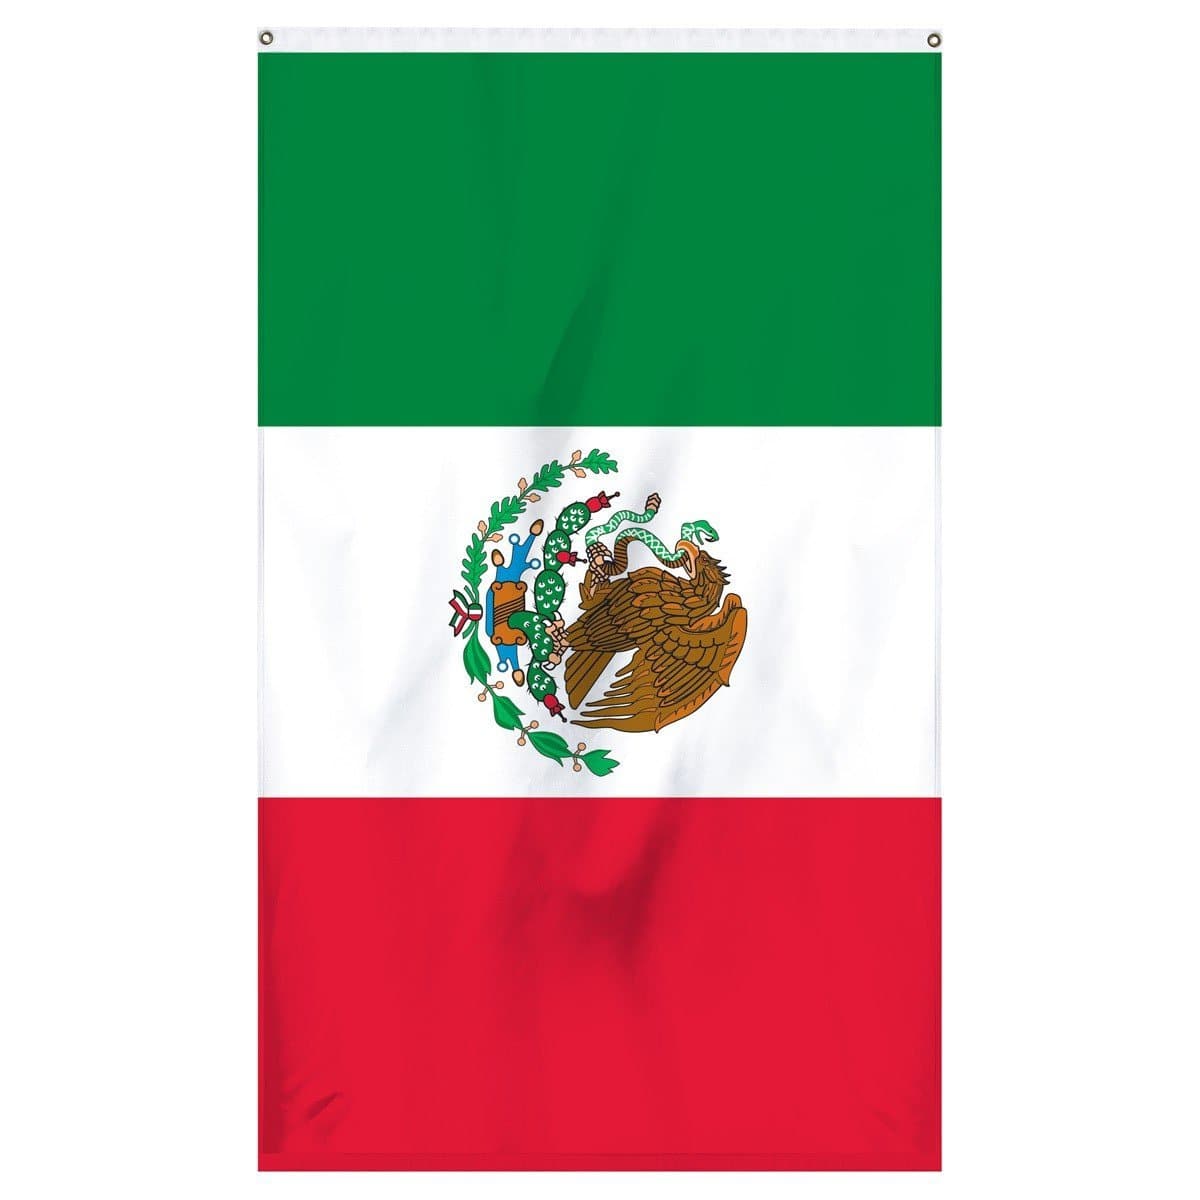 The national flag of Mexico for sale for flagpoles, parades, and collectors of international flags.